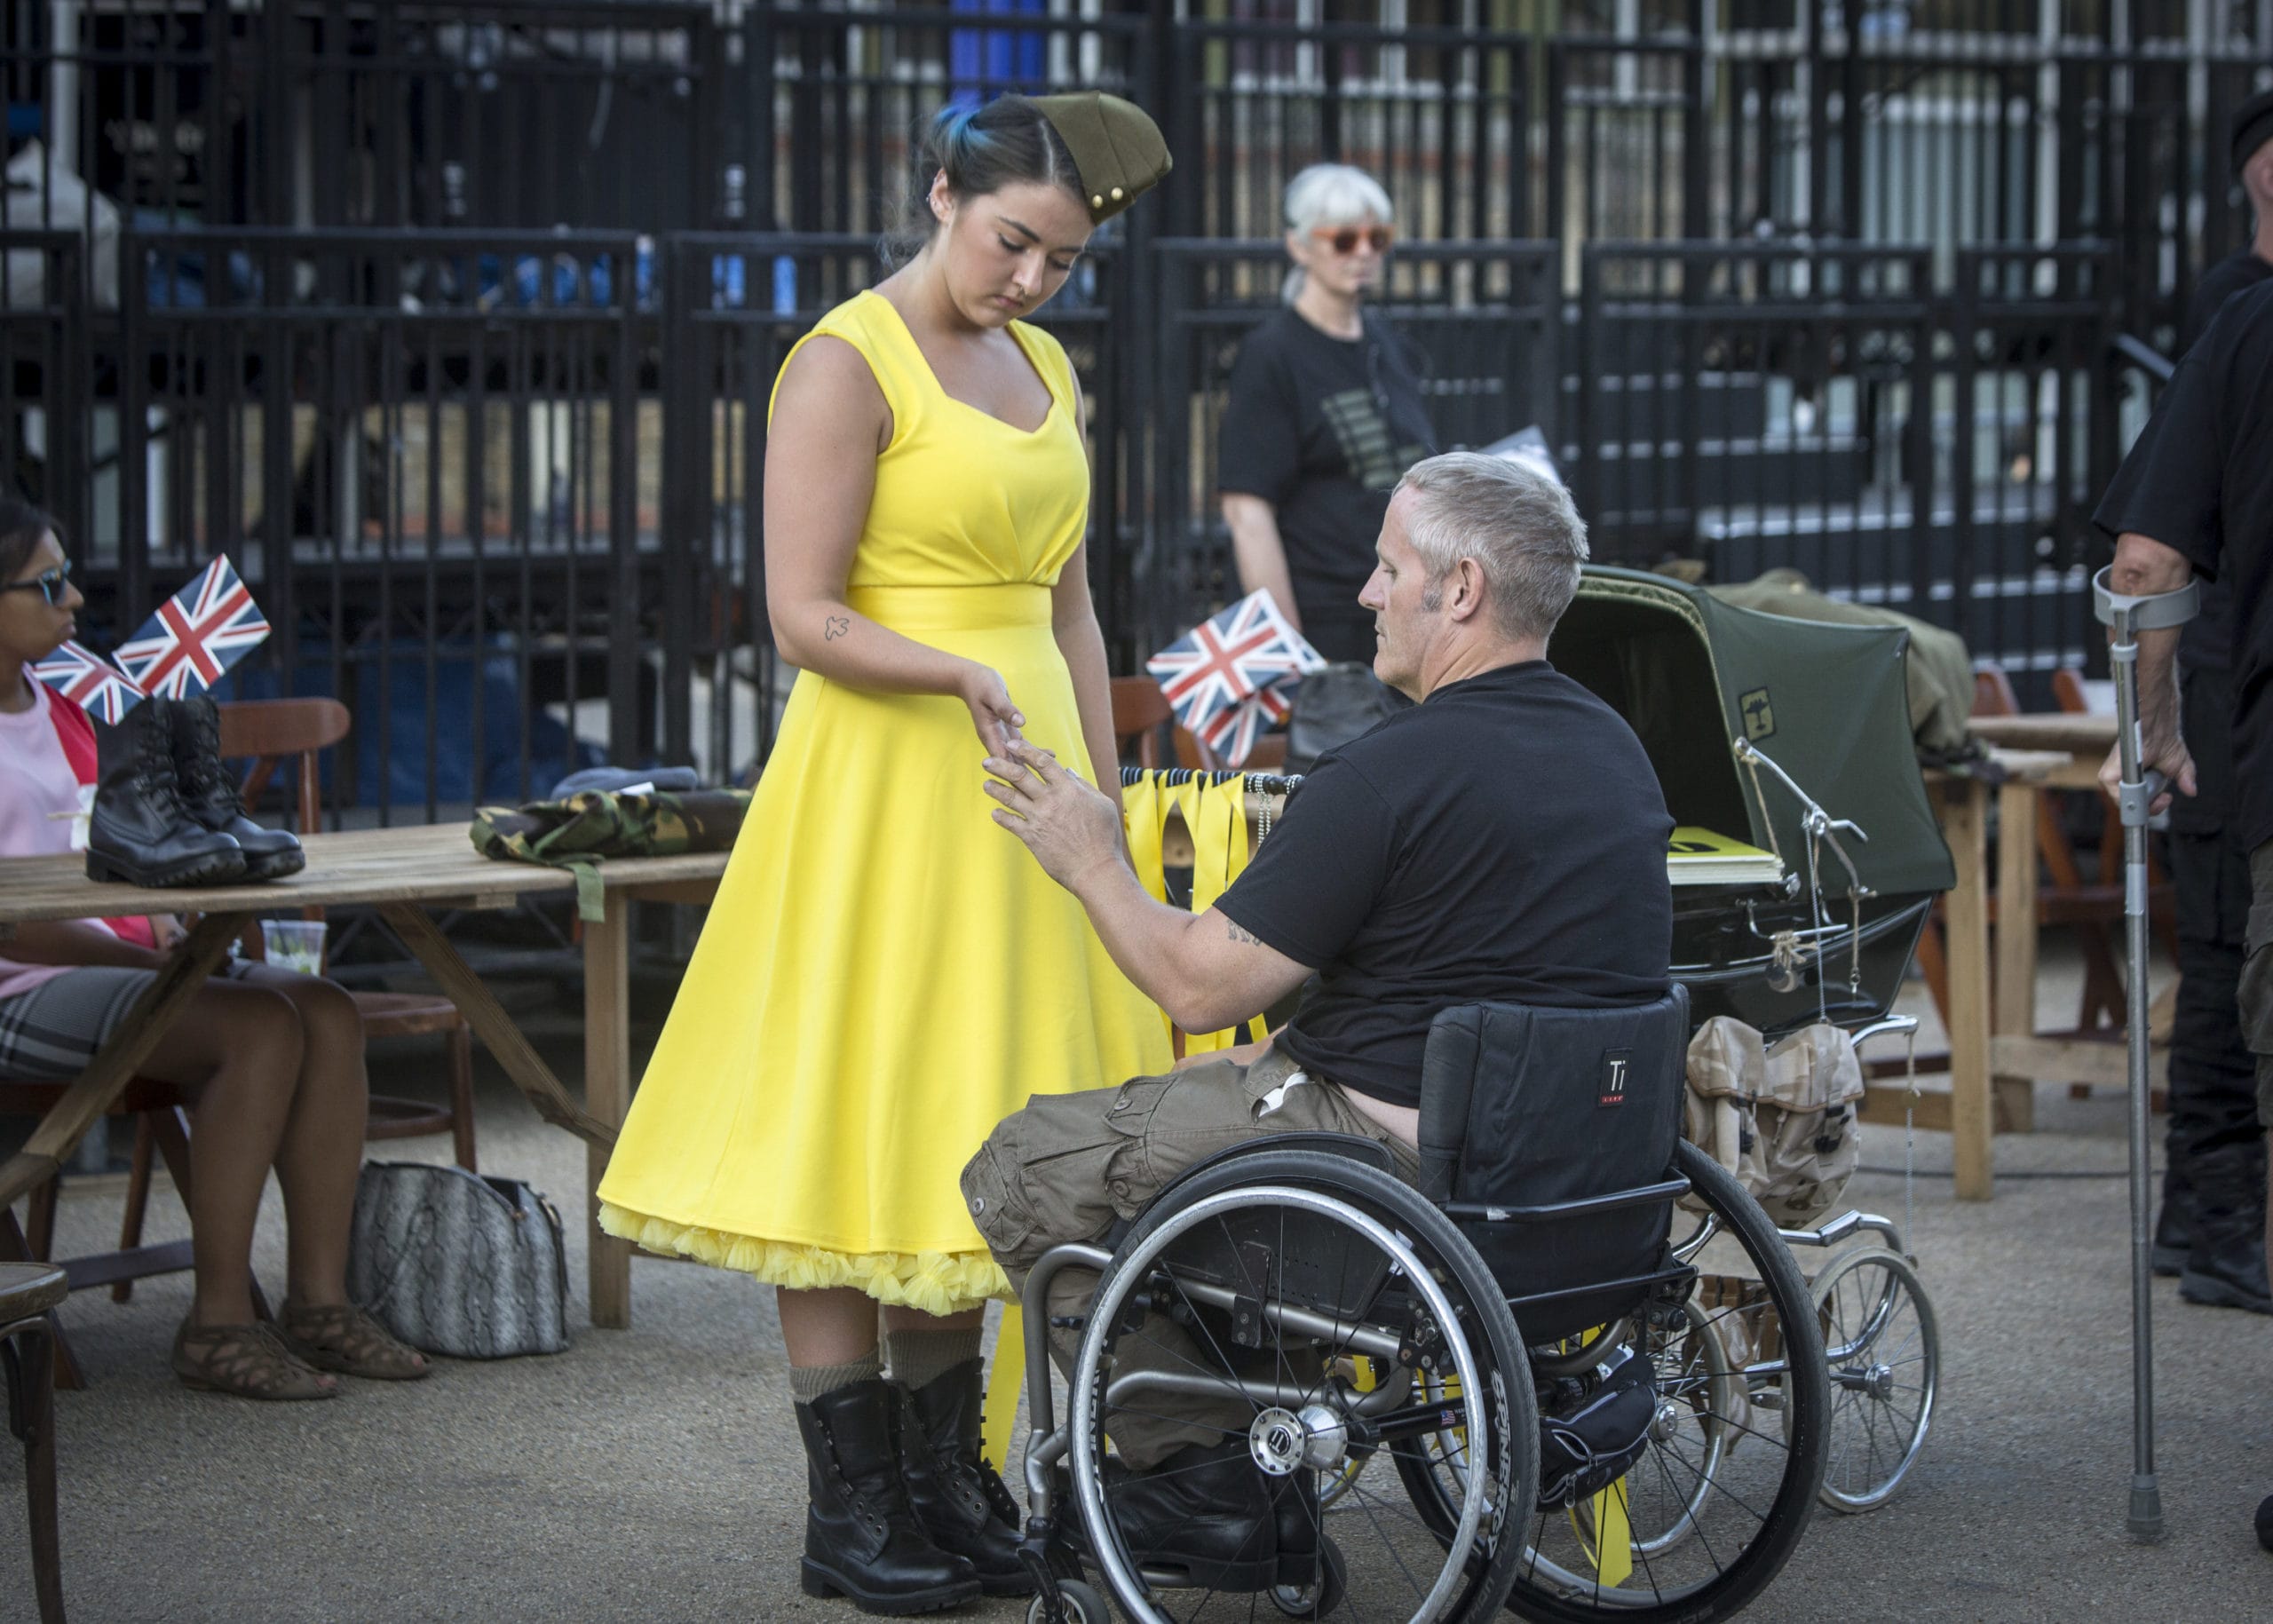 A man in a wheelchair grasps the hand of a young woman, stood up, wearing a vibrant yellow dress.